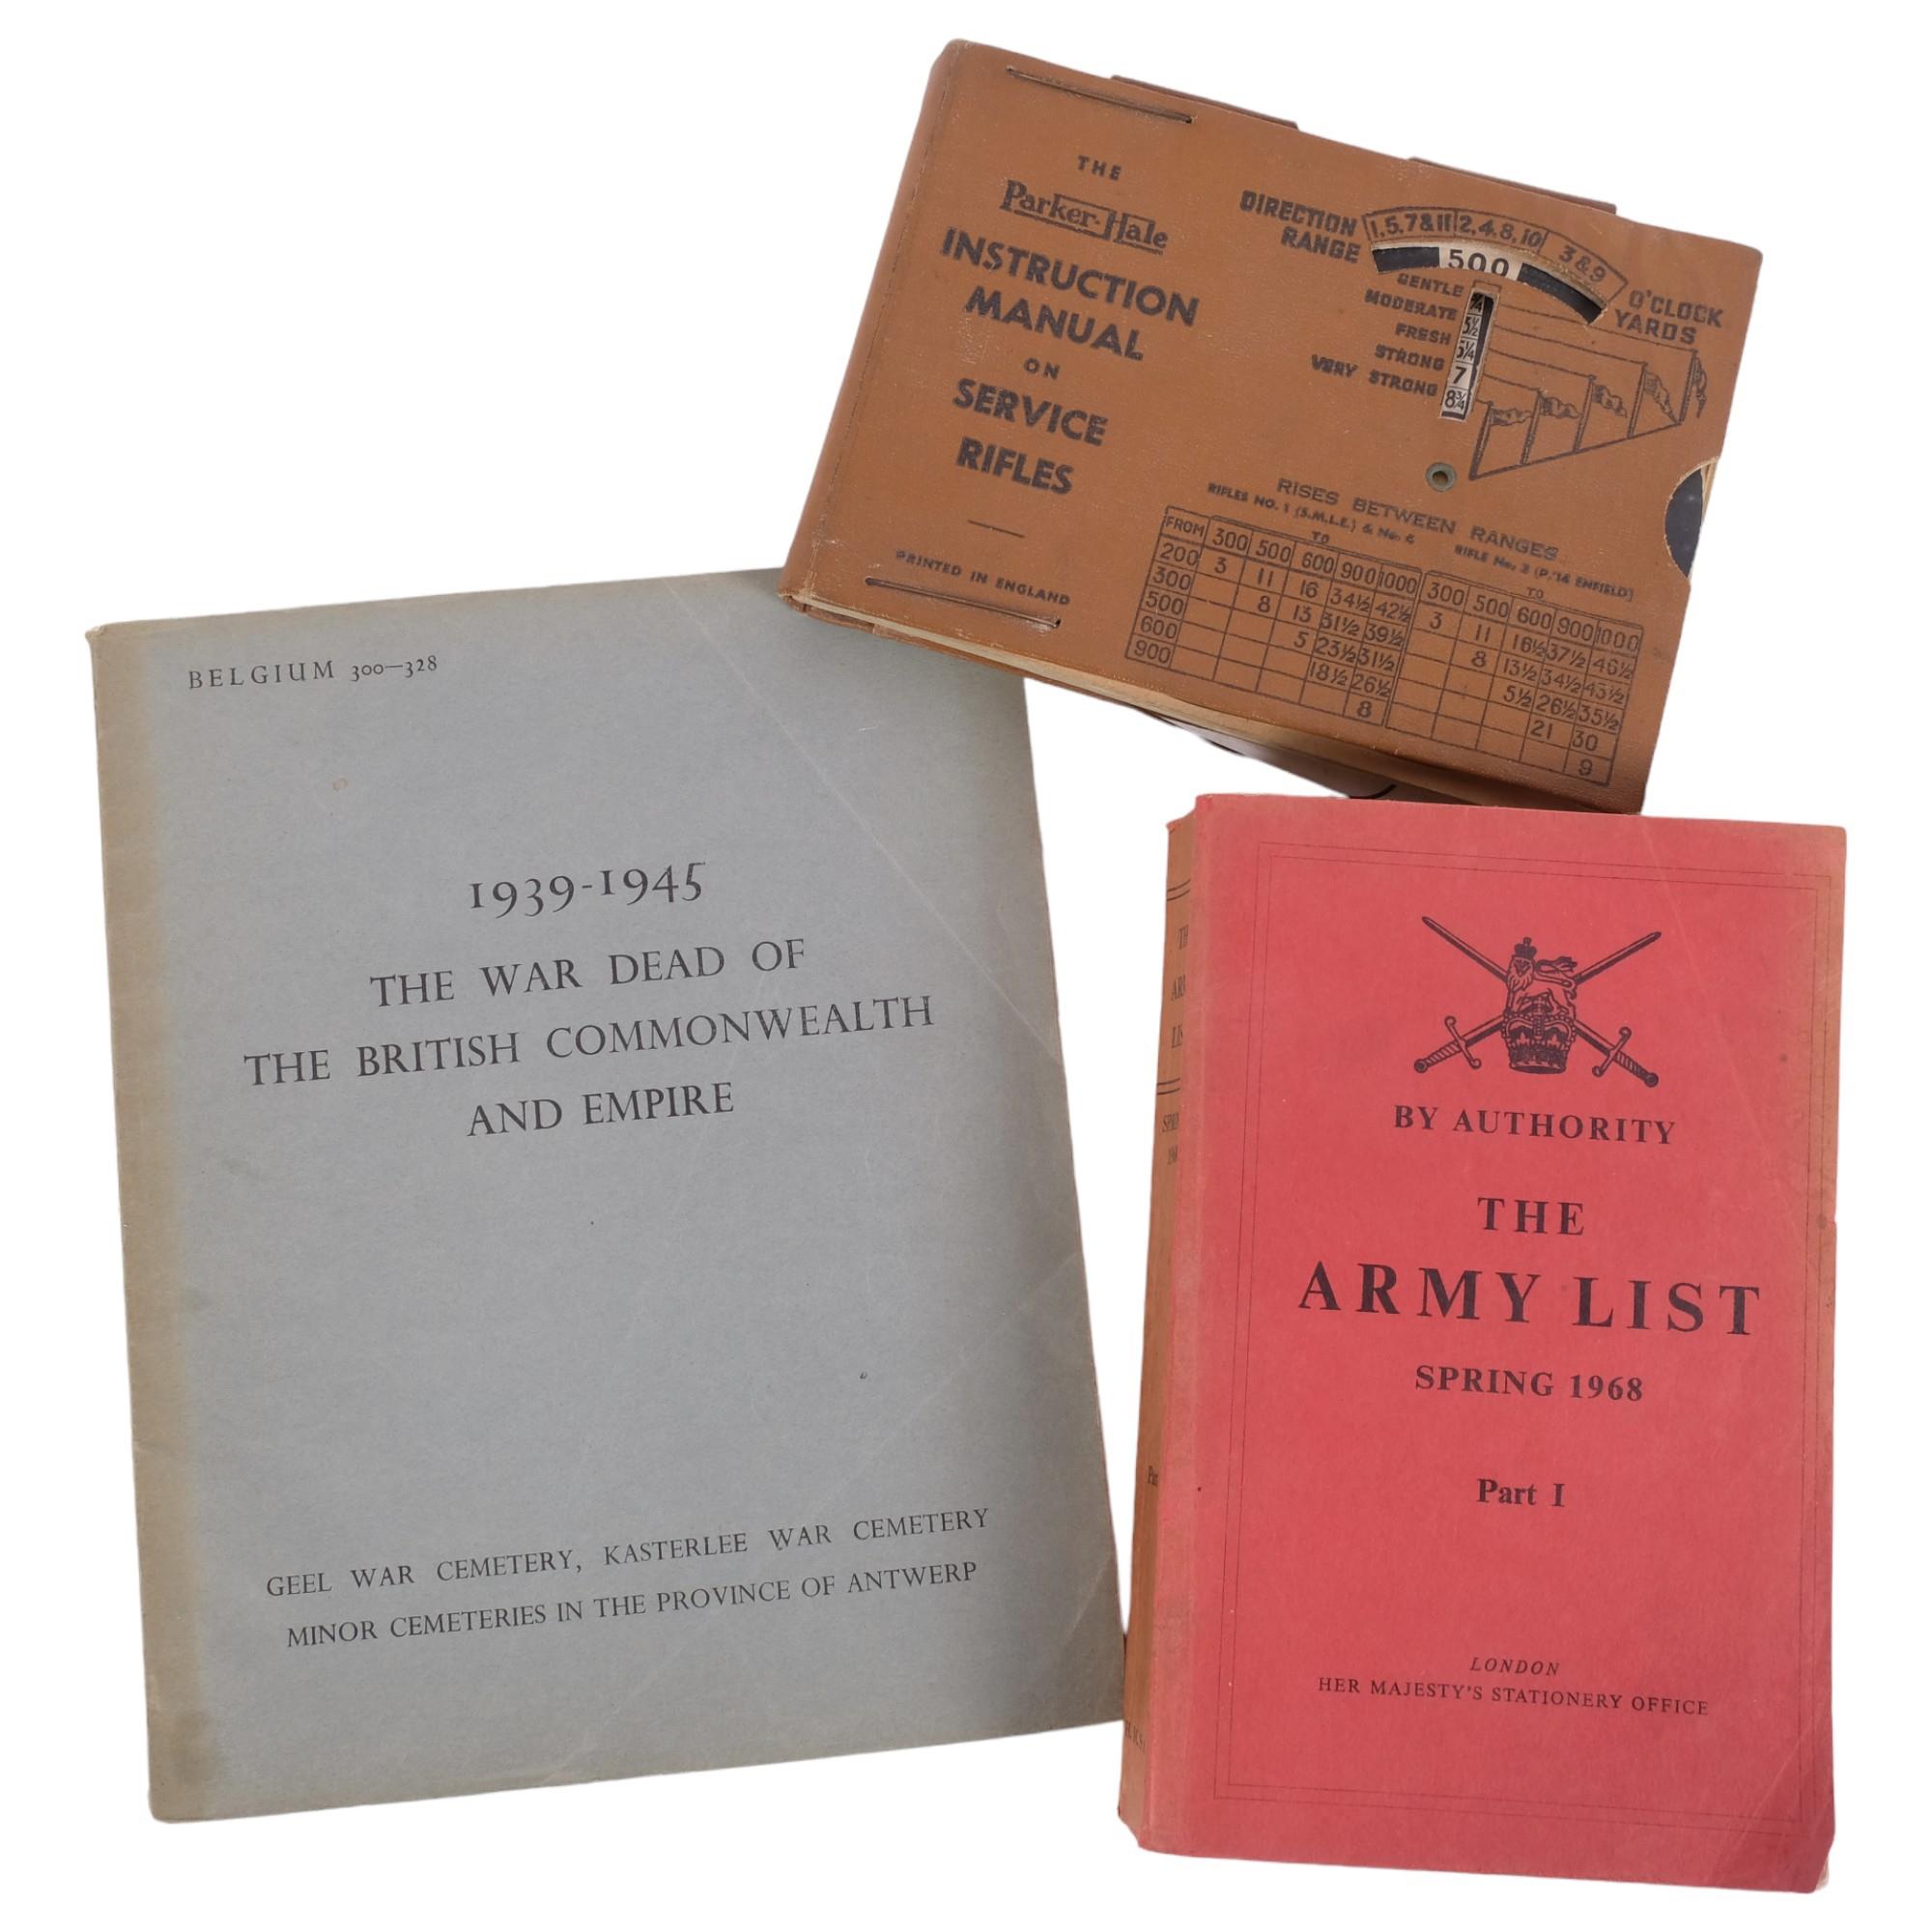 A selection of ephemera and items associated with the military, including 1939 - 1945 War Dead of